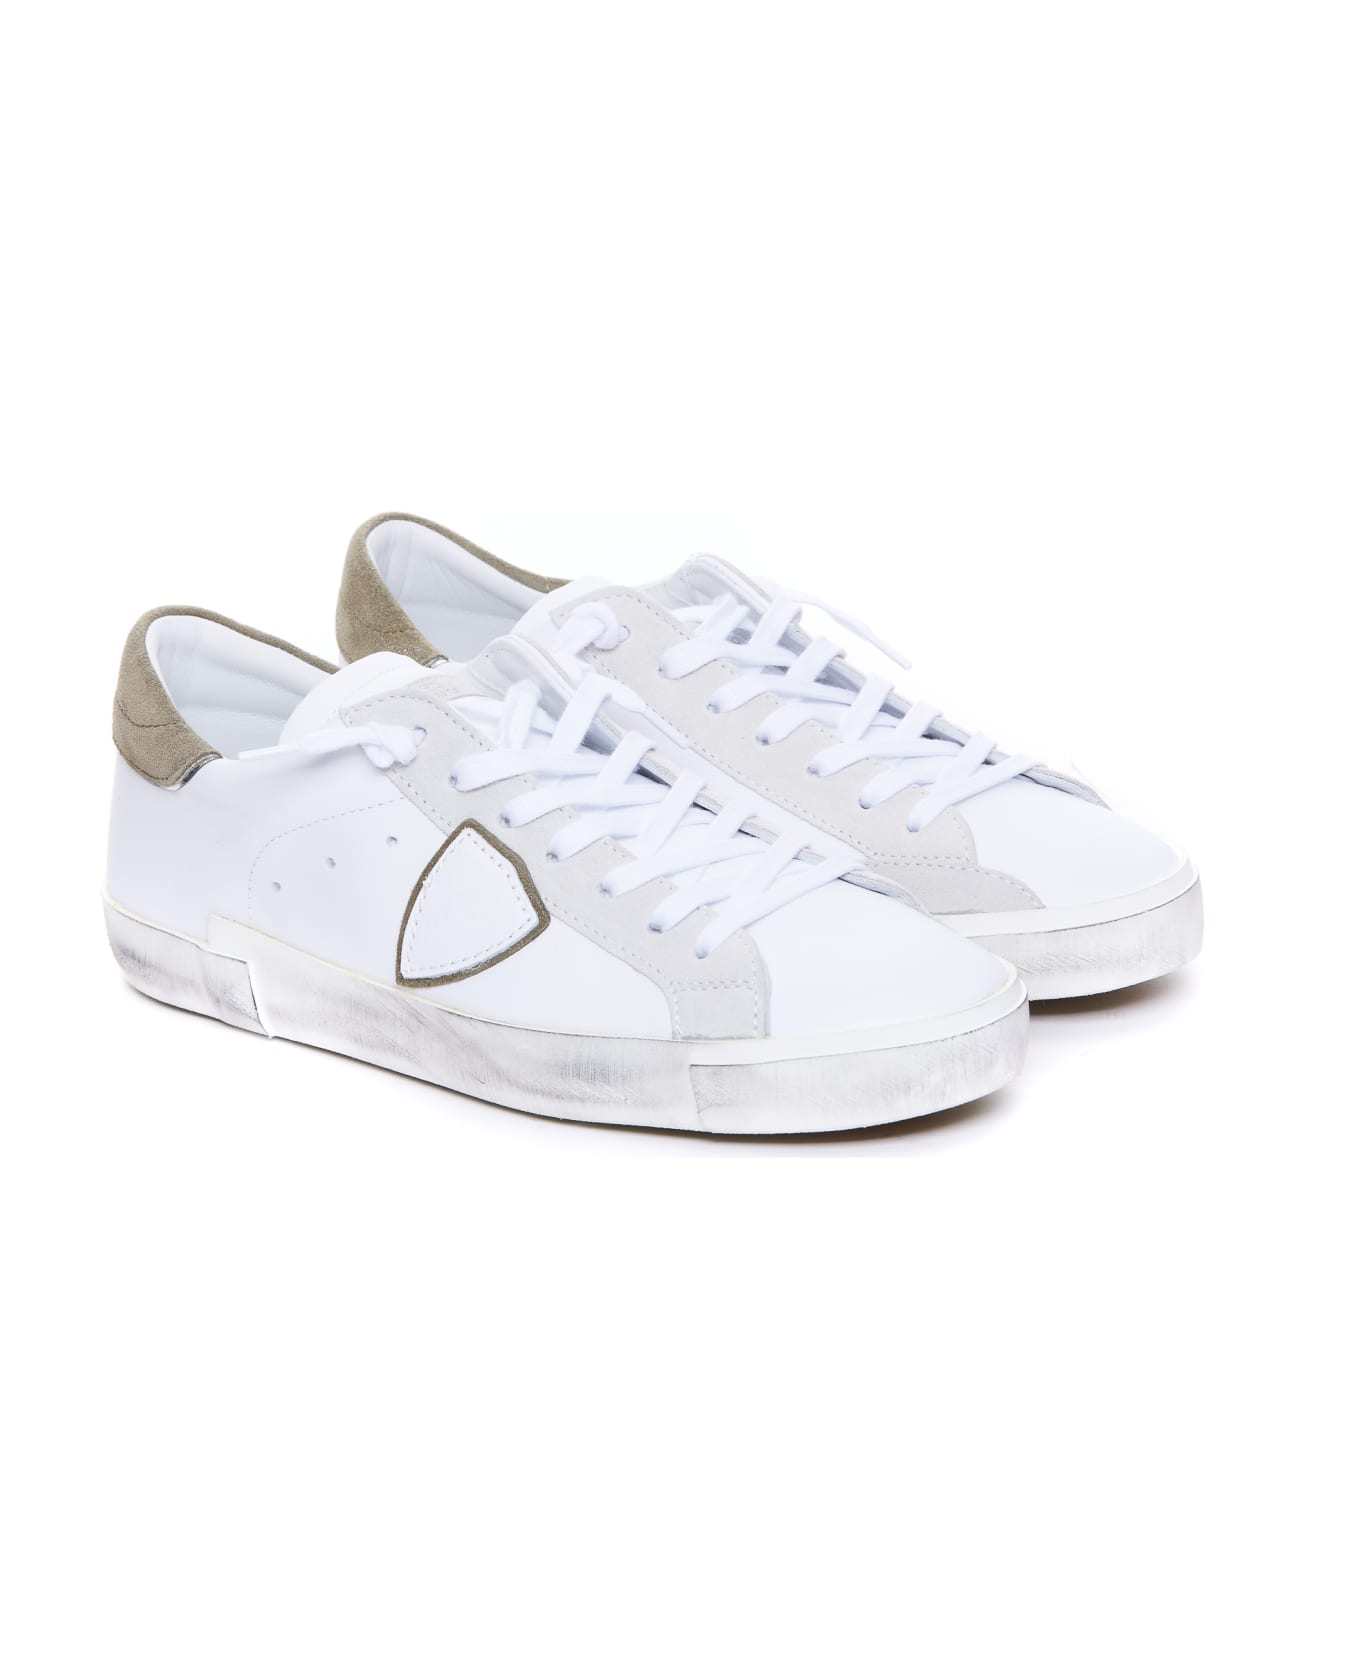 Philippe Model Prsx Low Sneakers - White